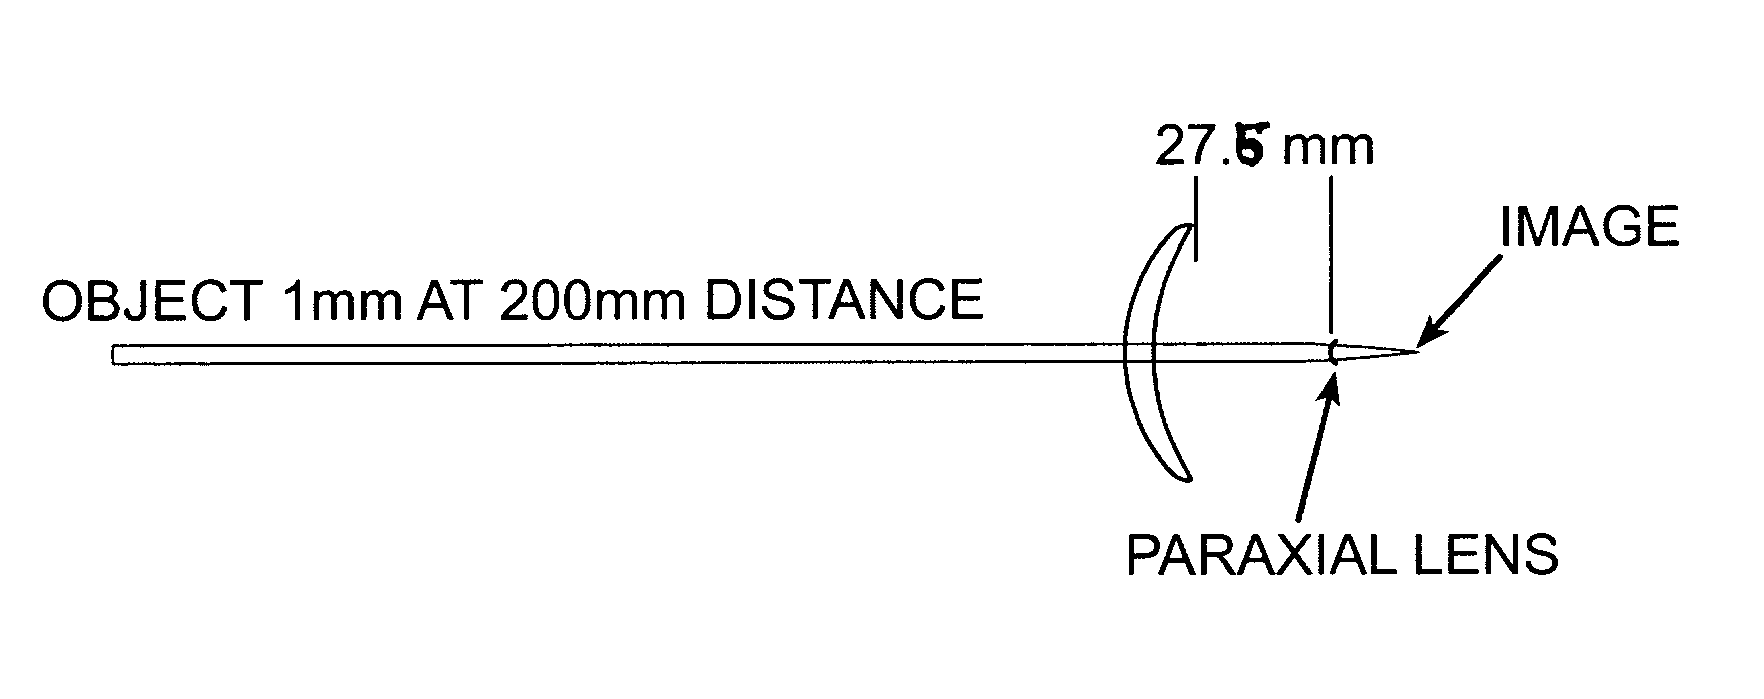 Progressive addition lenses with adjusted image magnification